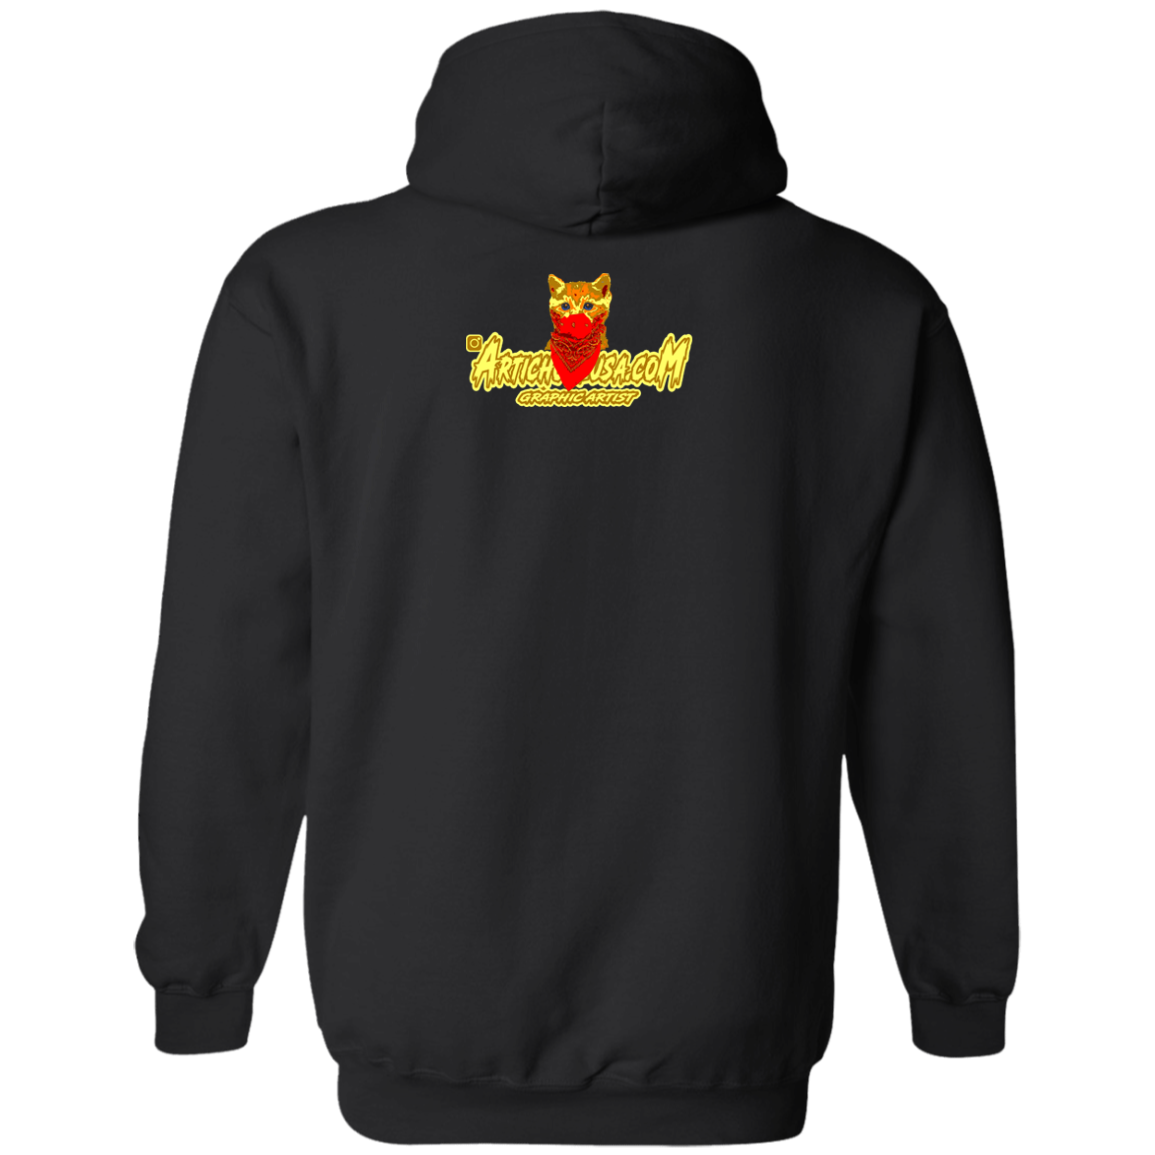 ArtichokeUSA Custom Design. You've Got To Be Kitten Me?! 2020, Not What We Expected. Pullover Hoodie